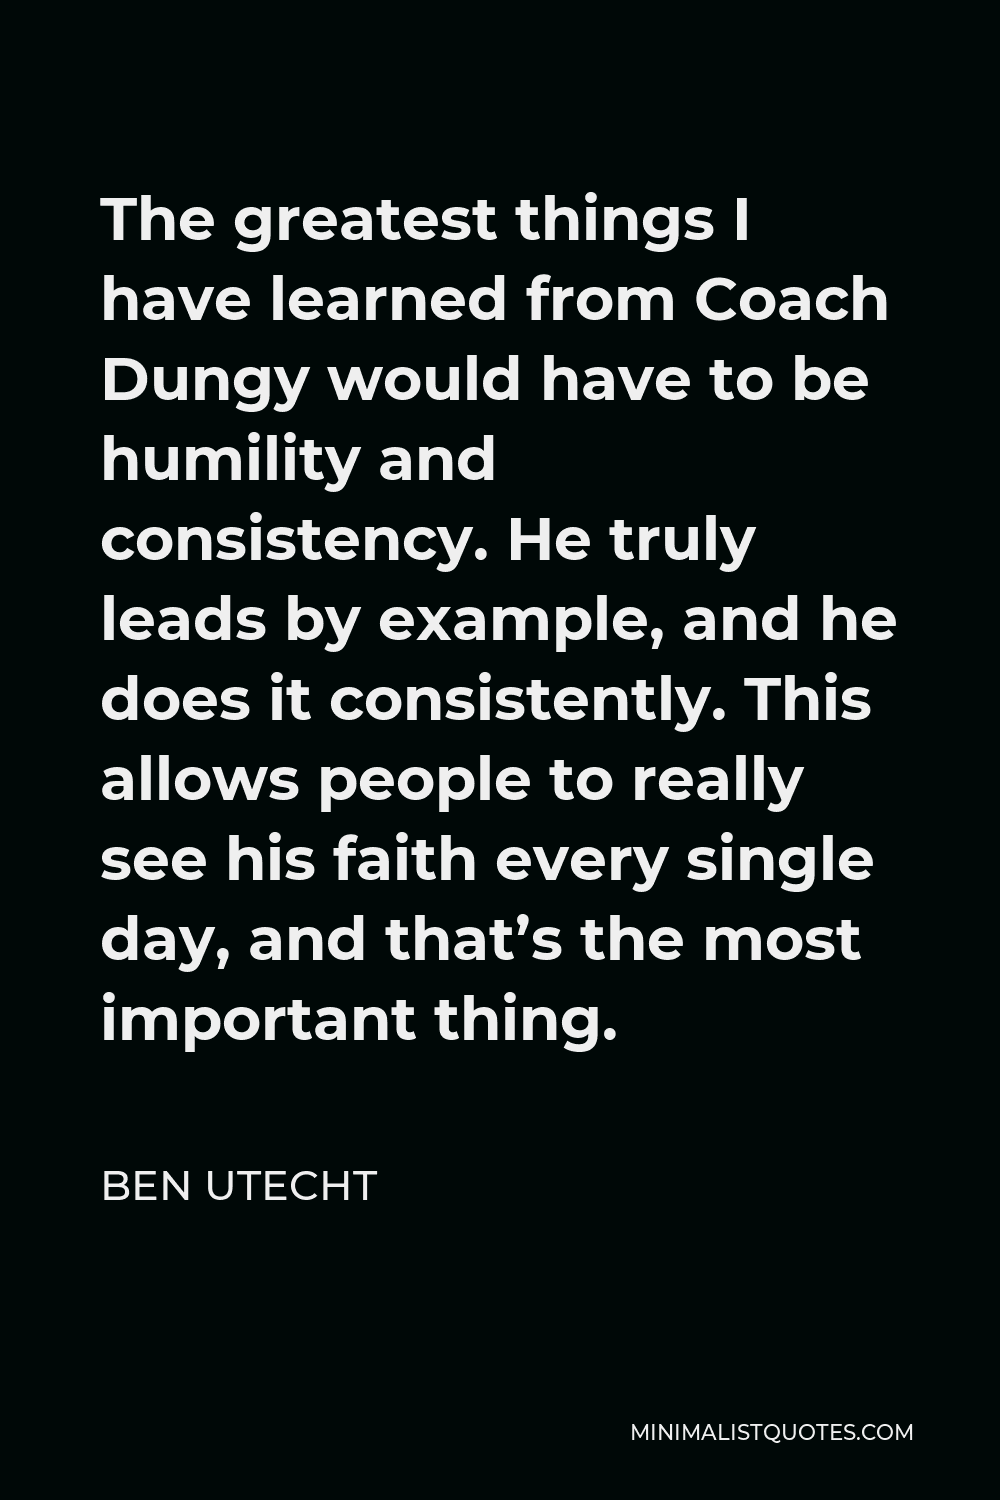 Ben Utecht Quote - The greatest things I have learned from Coach Dungy would have to be humility and consistency. He truly leads by example, and he does it consistently. This allows people to really see his faith every single day, and that’s the most important thing.